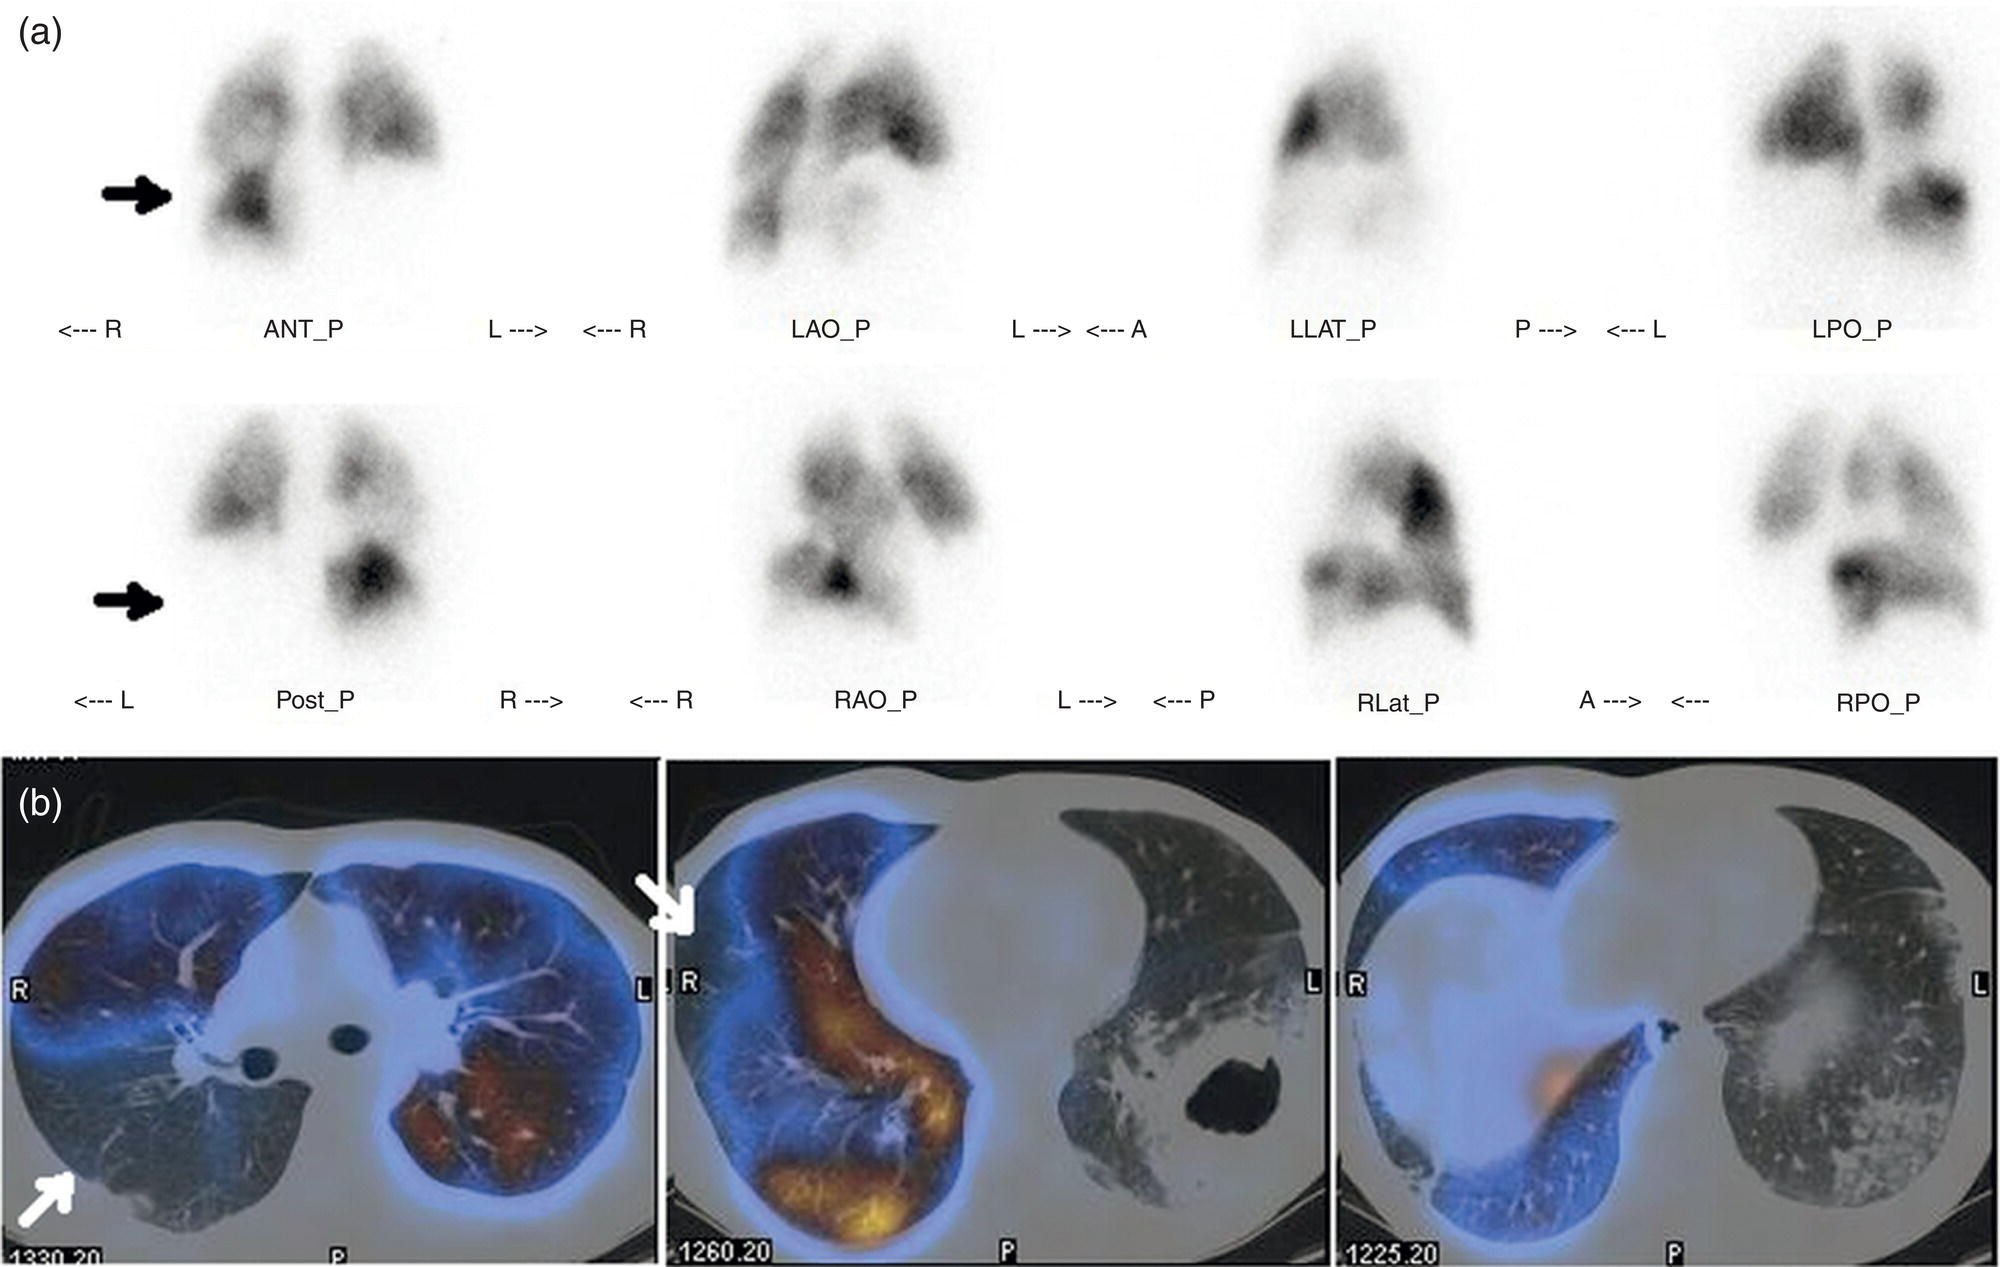 Schematic illustration of (a) planar and (b) transaxial SPECT–CT fusion images of a 56-year-old male patient admitted to the emergency department with a sudden onset of dyspnea. The planar images show large wedge-shaped perfusion defects on both lungs (black arrows).